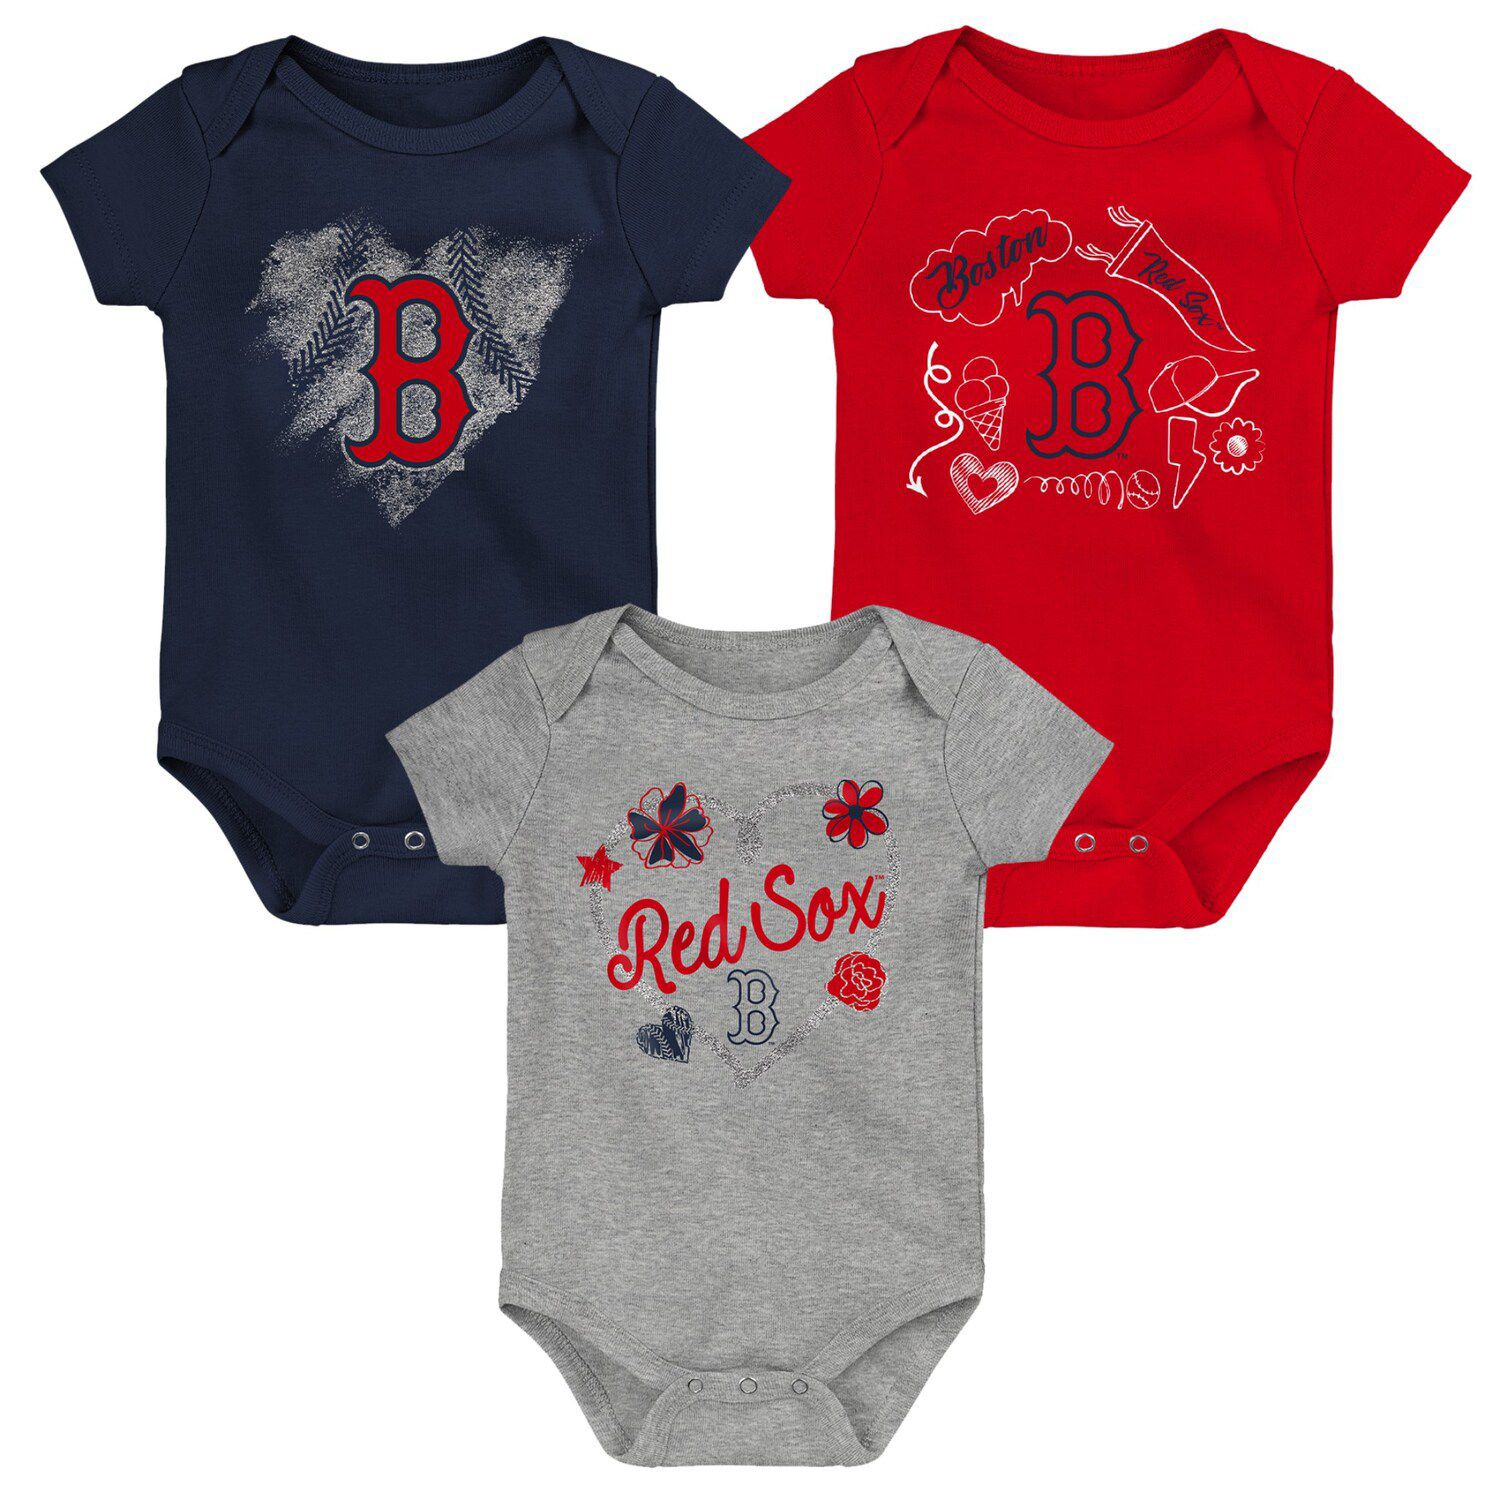 St. Louis Cardinals Infant Red/Navy/Pink Baseball Baby 3-Pack